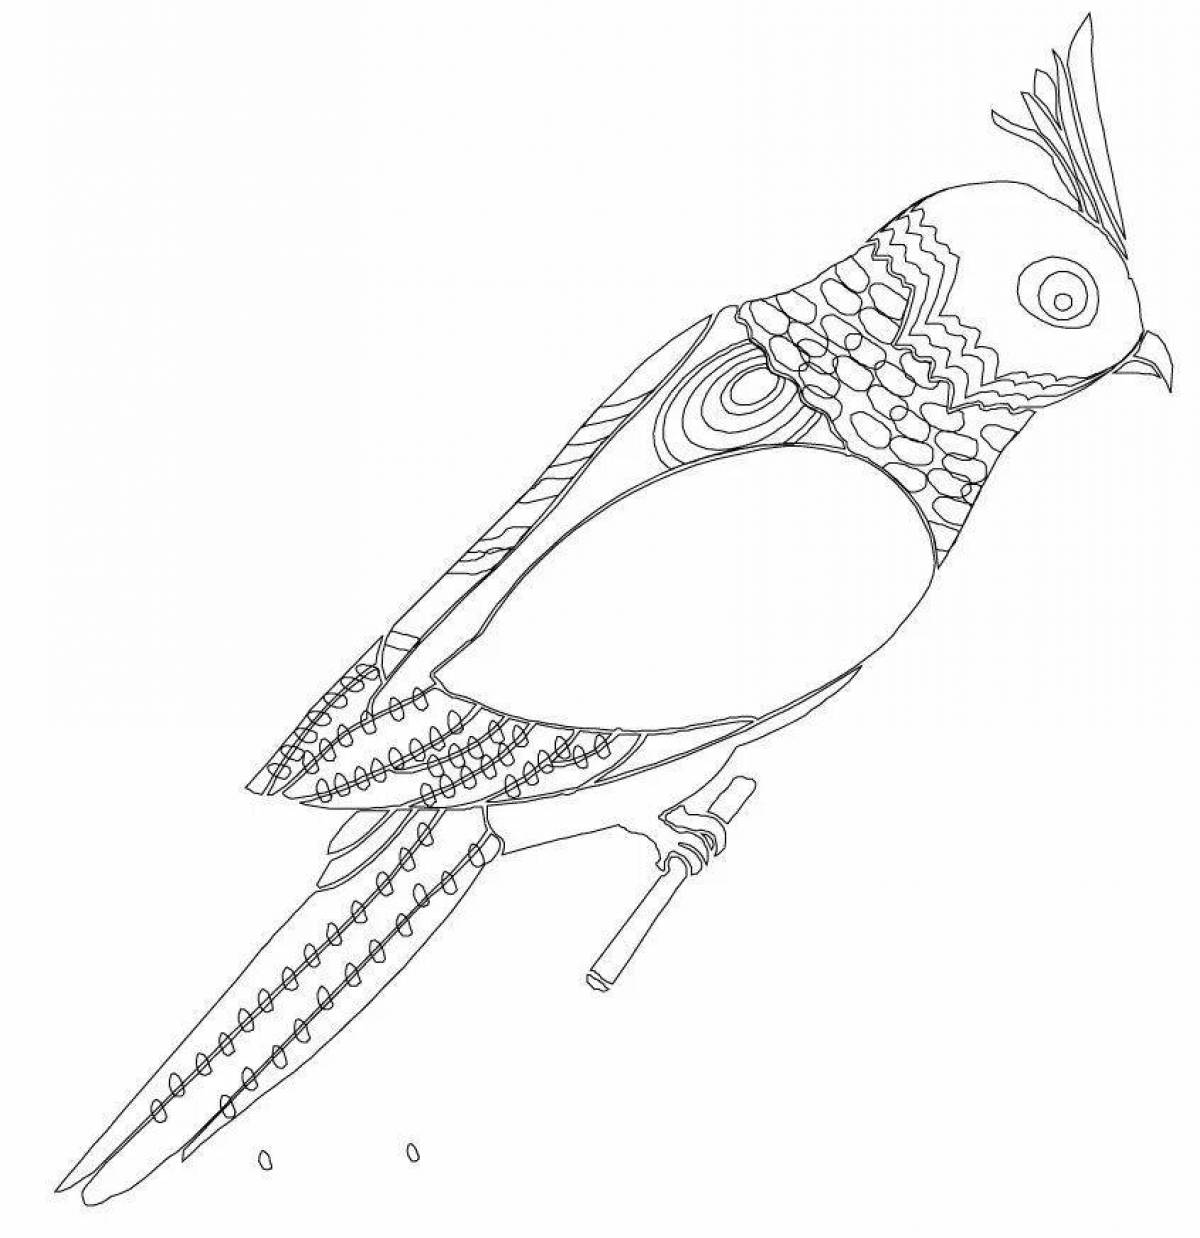 Animated budgerigar coloring page